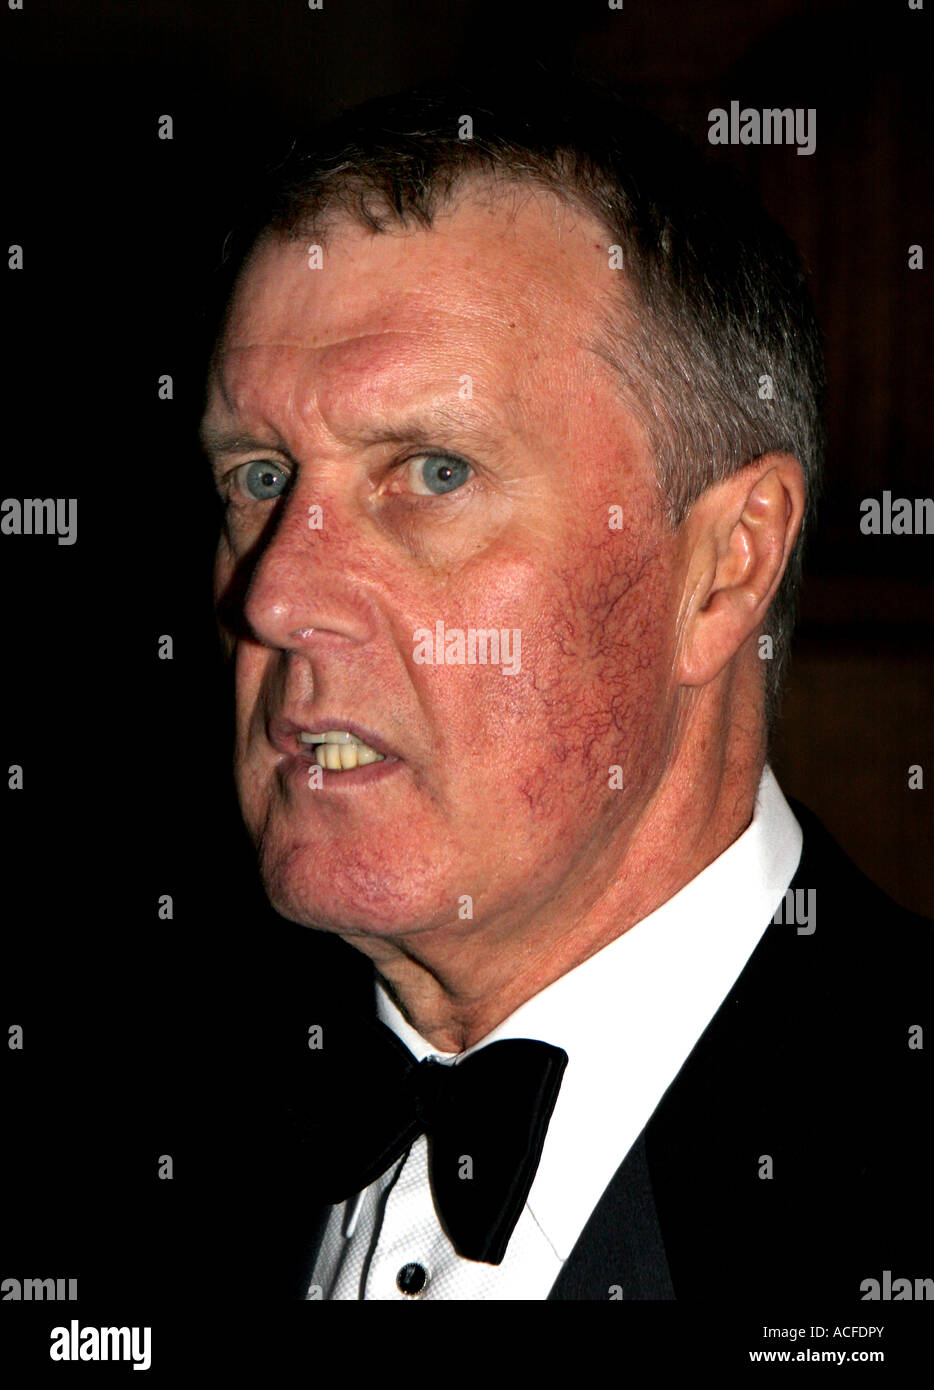 Sir Geoff Hurst, World Cup winner 1966, hat trick hero at a charity event in black tie Stock Photo